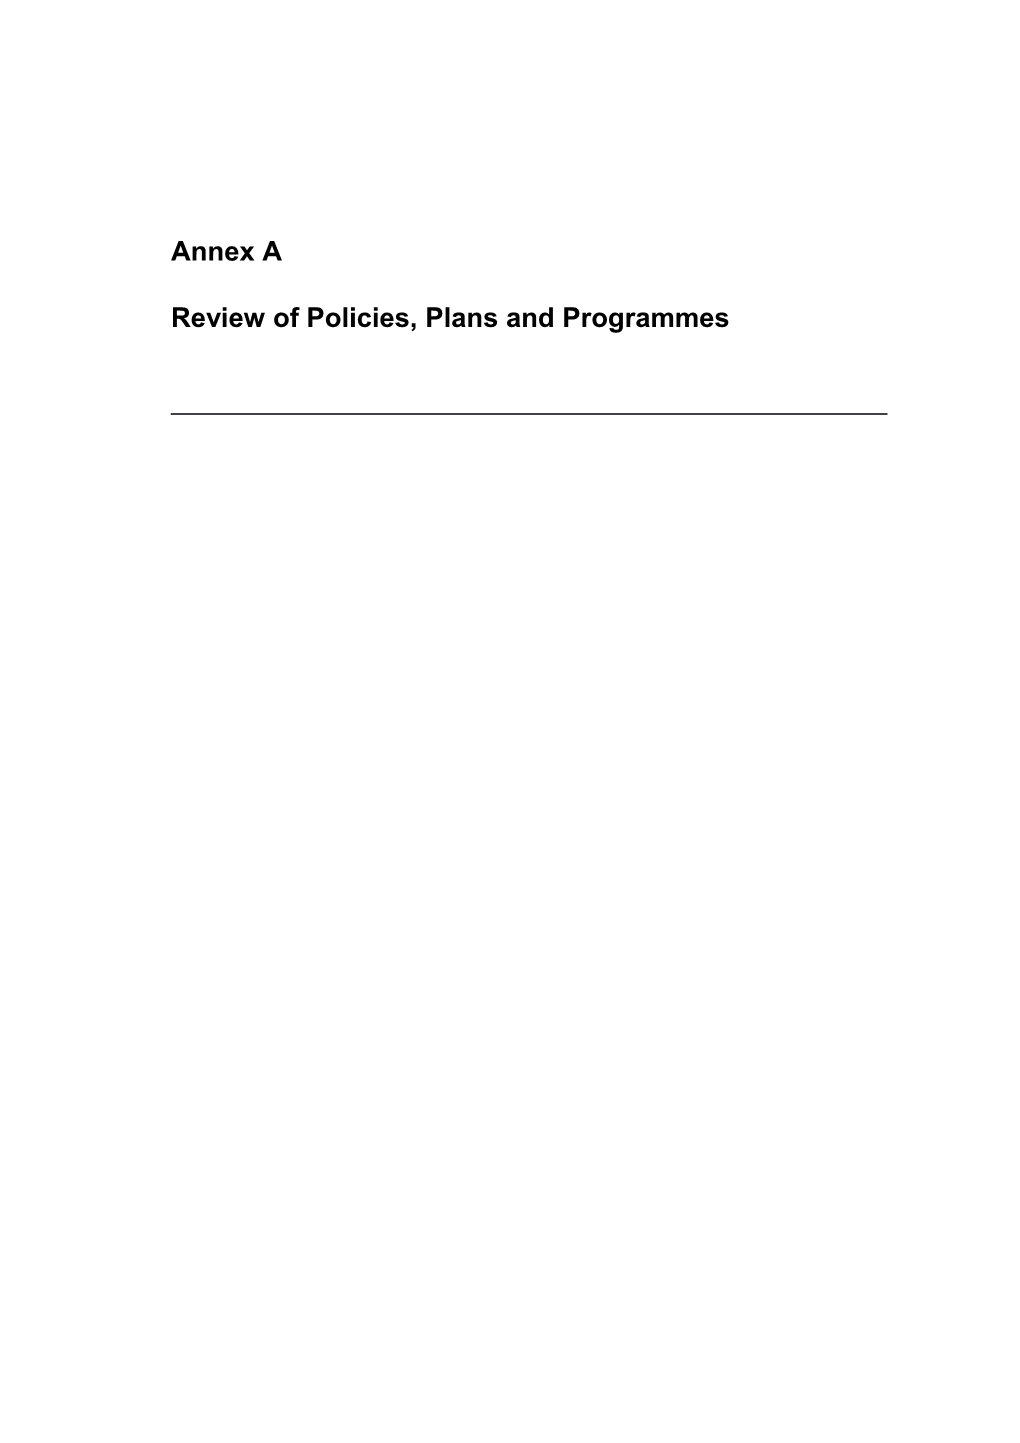 Review of Policies, Plans and Programmes